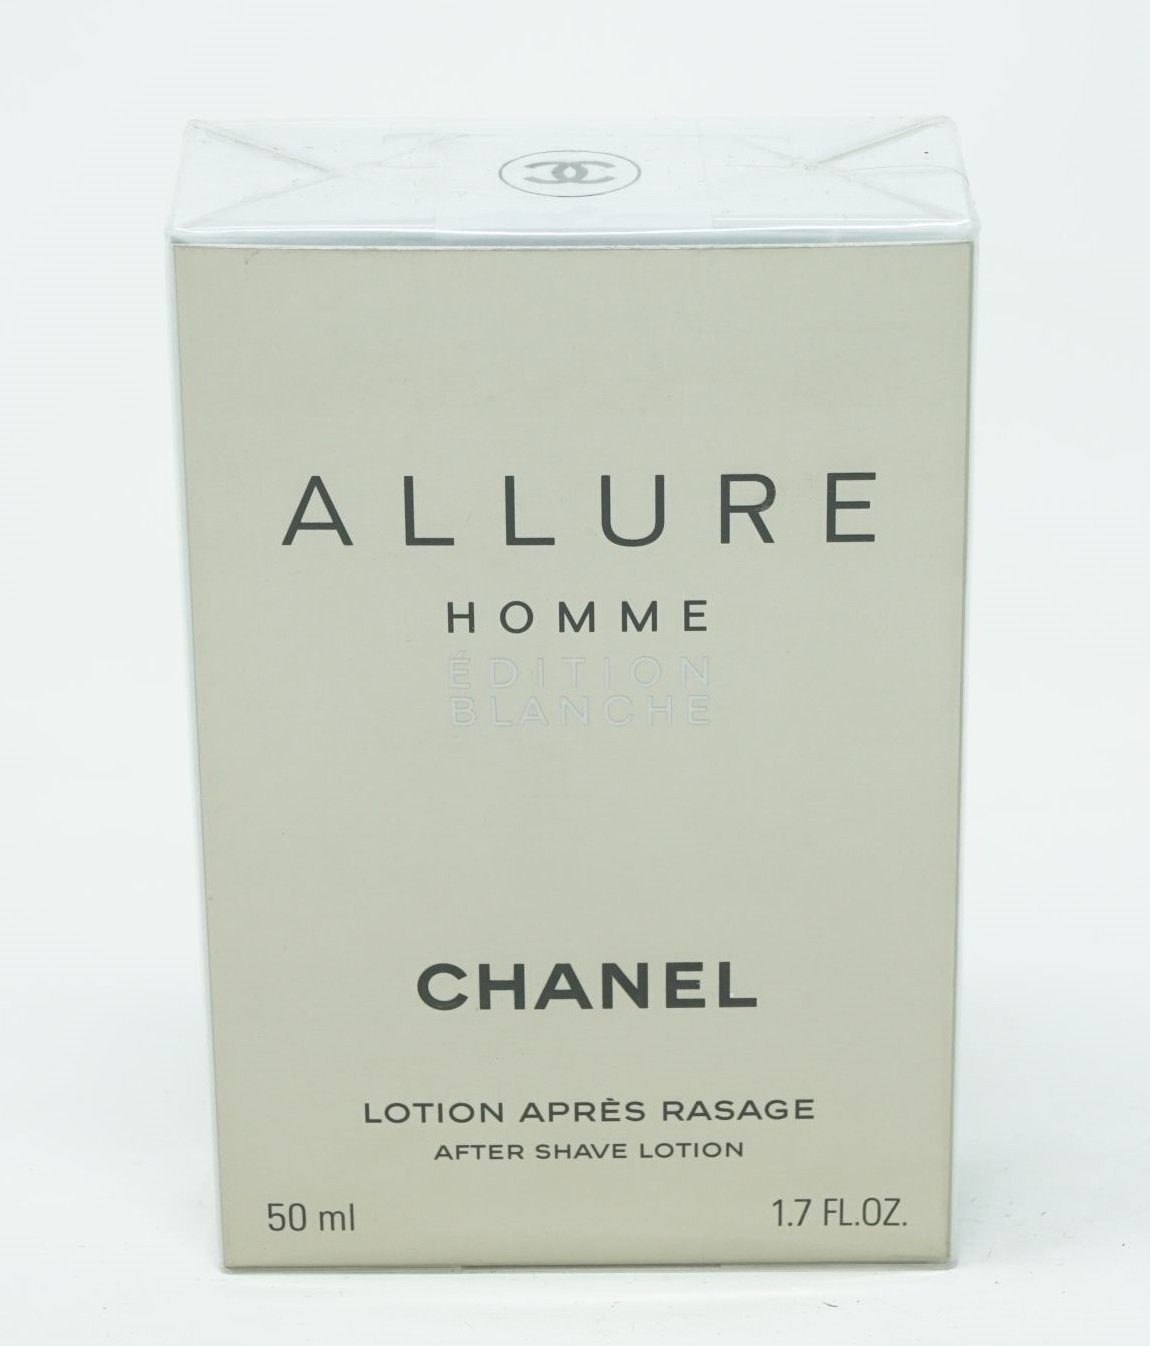 Allure Homme Blanche 50 After Lotion After Chanel Shave Shave Edition CHANEL ml Lotion